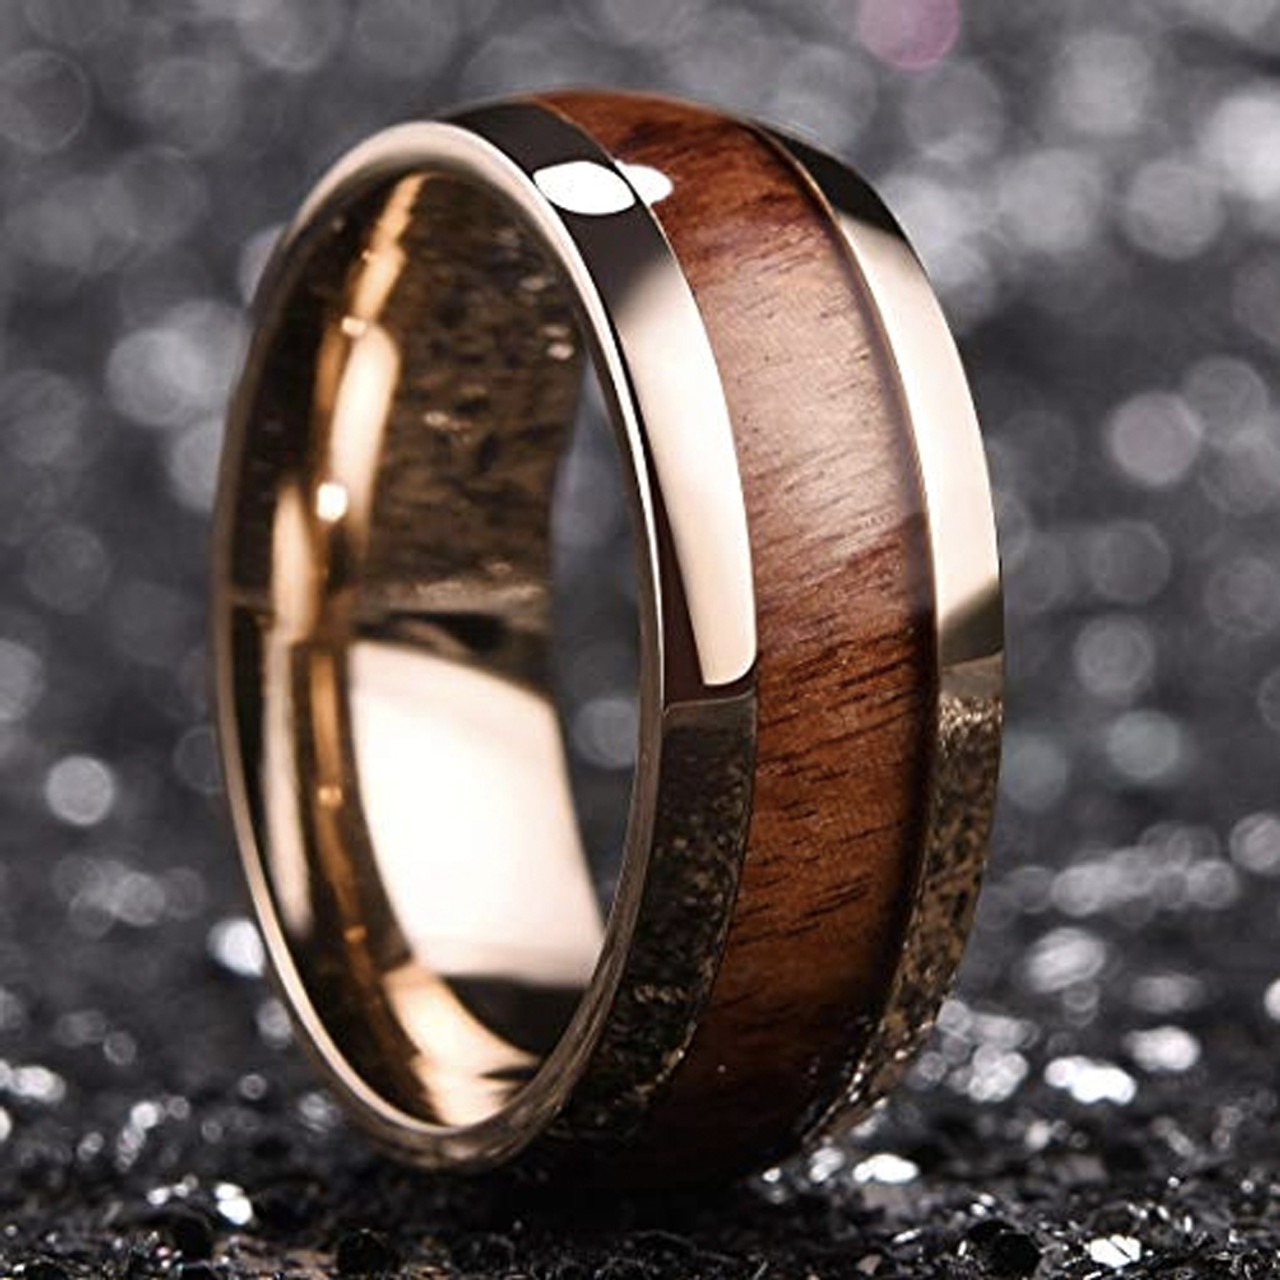 (8mm) Unisex or Men's Wood Inlay and Rose Gold Tone Titanium Steel Ring Band with High Polish Domed Top